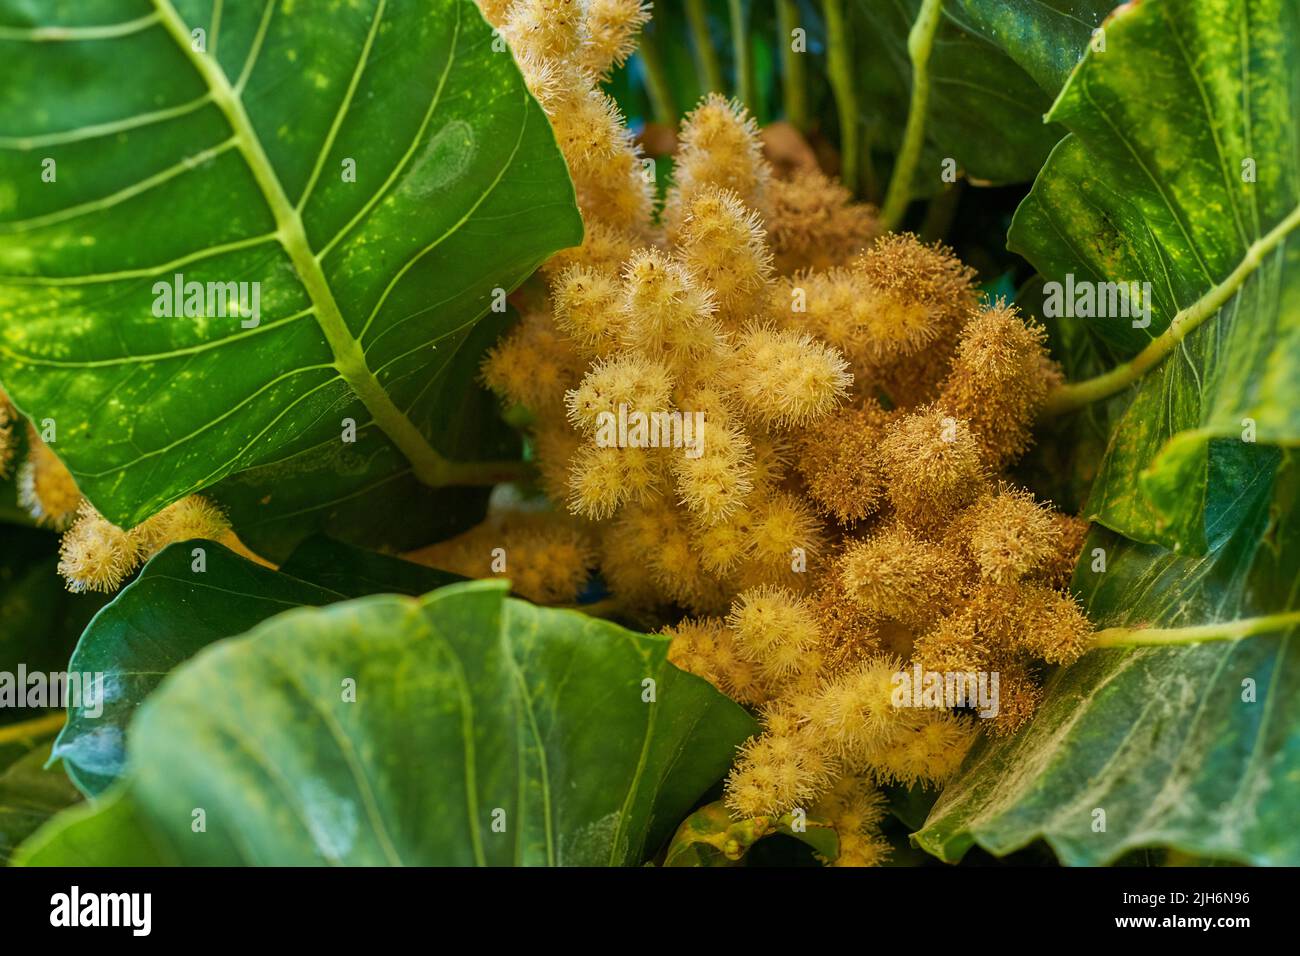 Golden chestnut tree with spiny fruit, Chinquapin plant. Vibrant leaves and palm fruit growing in a remote location in nature on a sunny day. Closeup Stock Photo